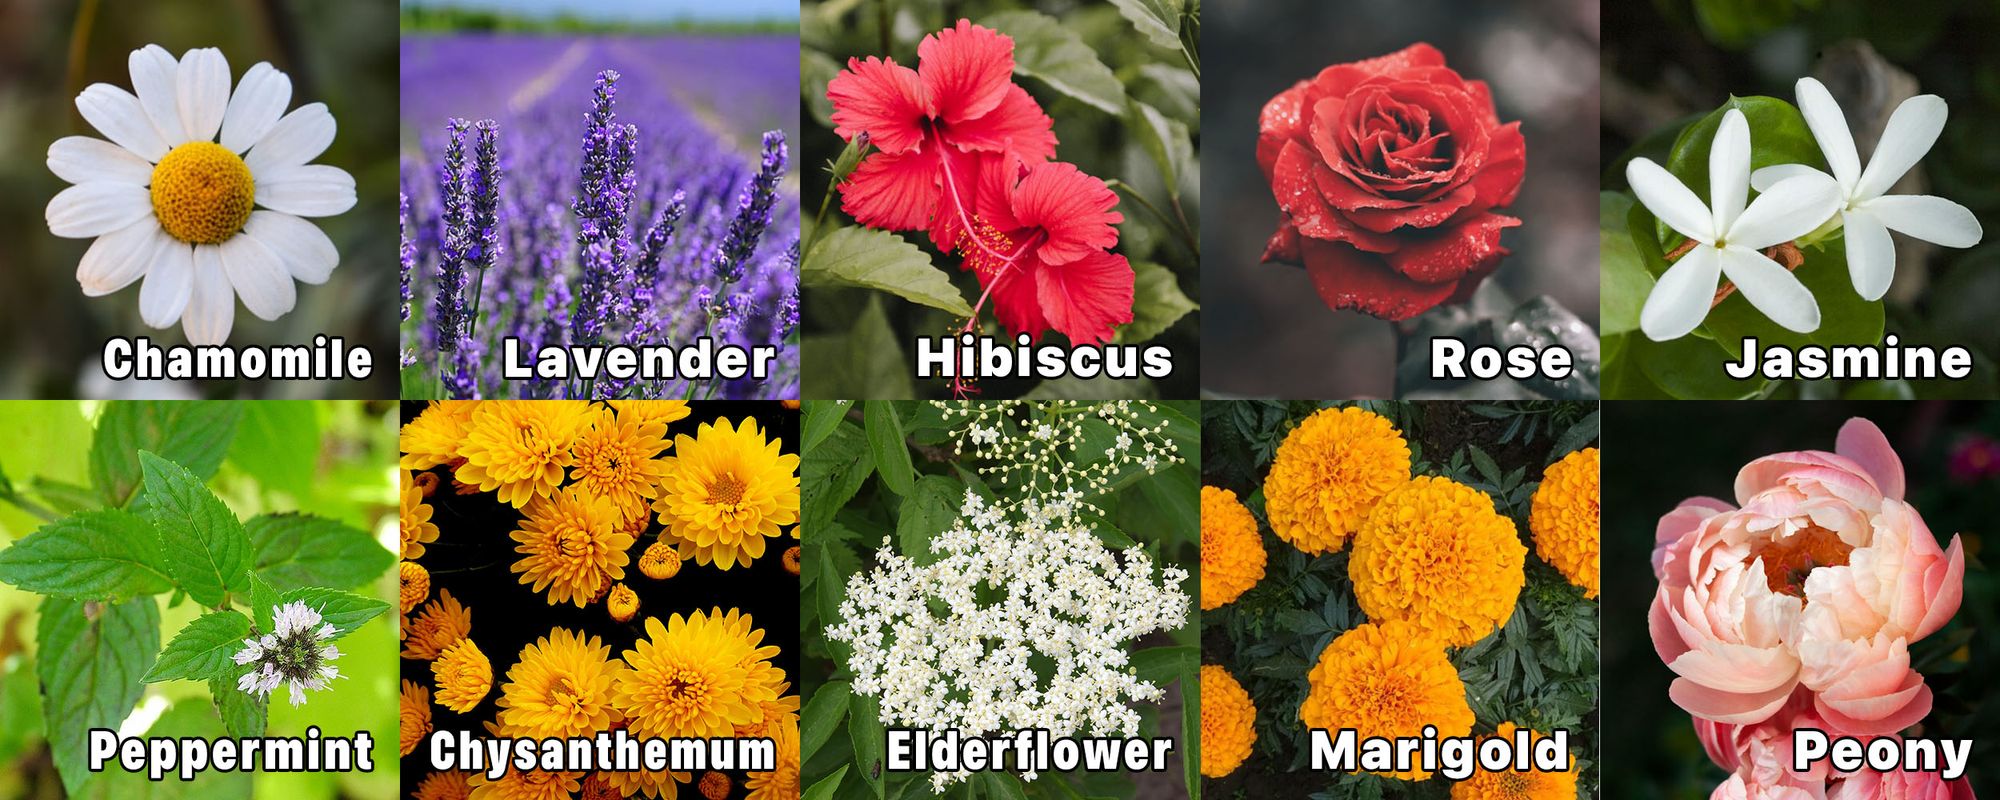 Types of Flowers: Garden, Bouquet, Tropical, and More!